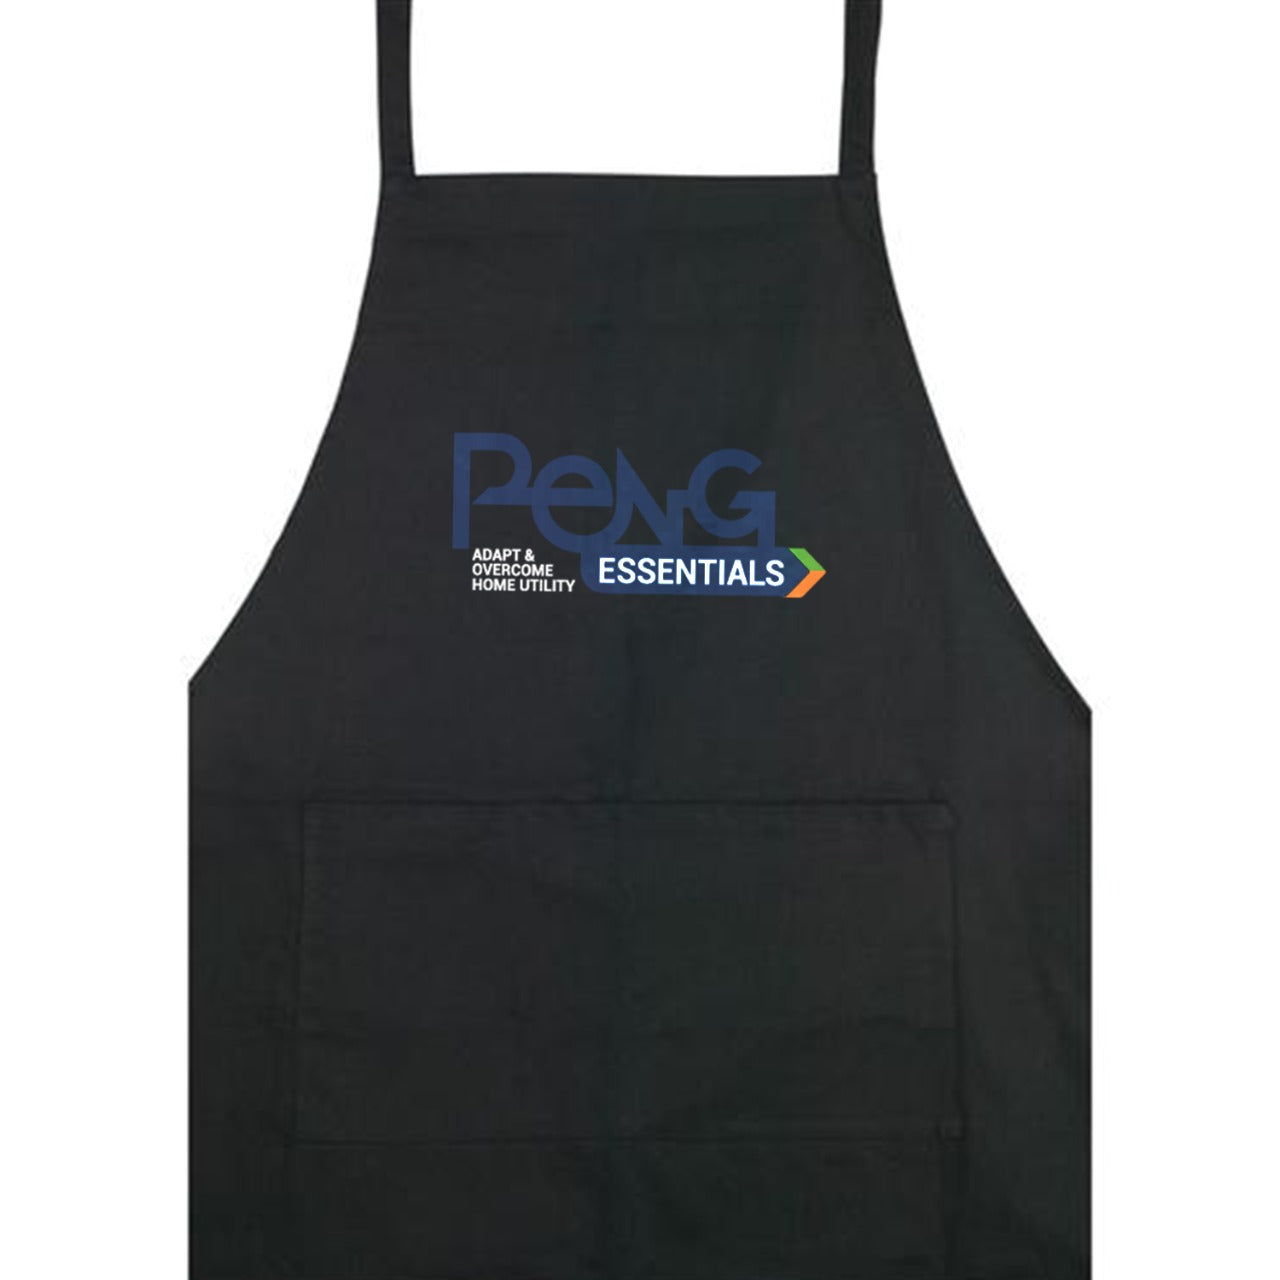 Peng Essentials Kitchen Cooking Two Pockets Apron with Adjustable Neck Strap, Extended Waist Ties, Black